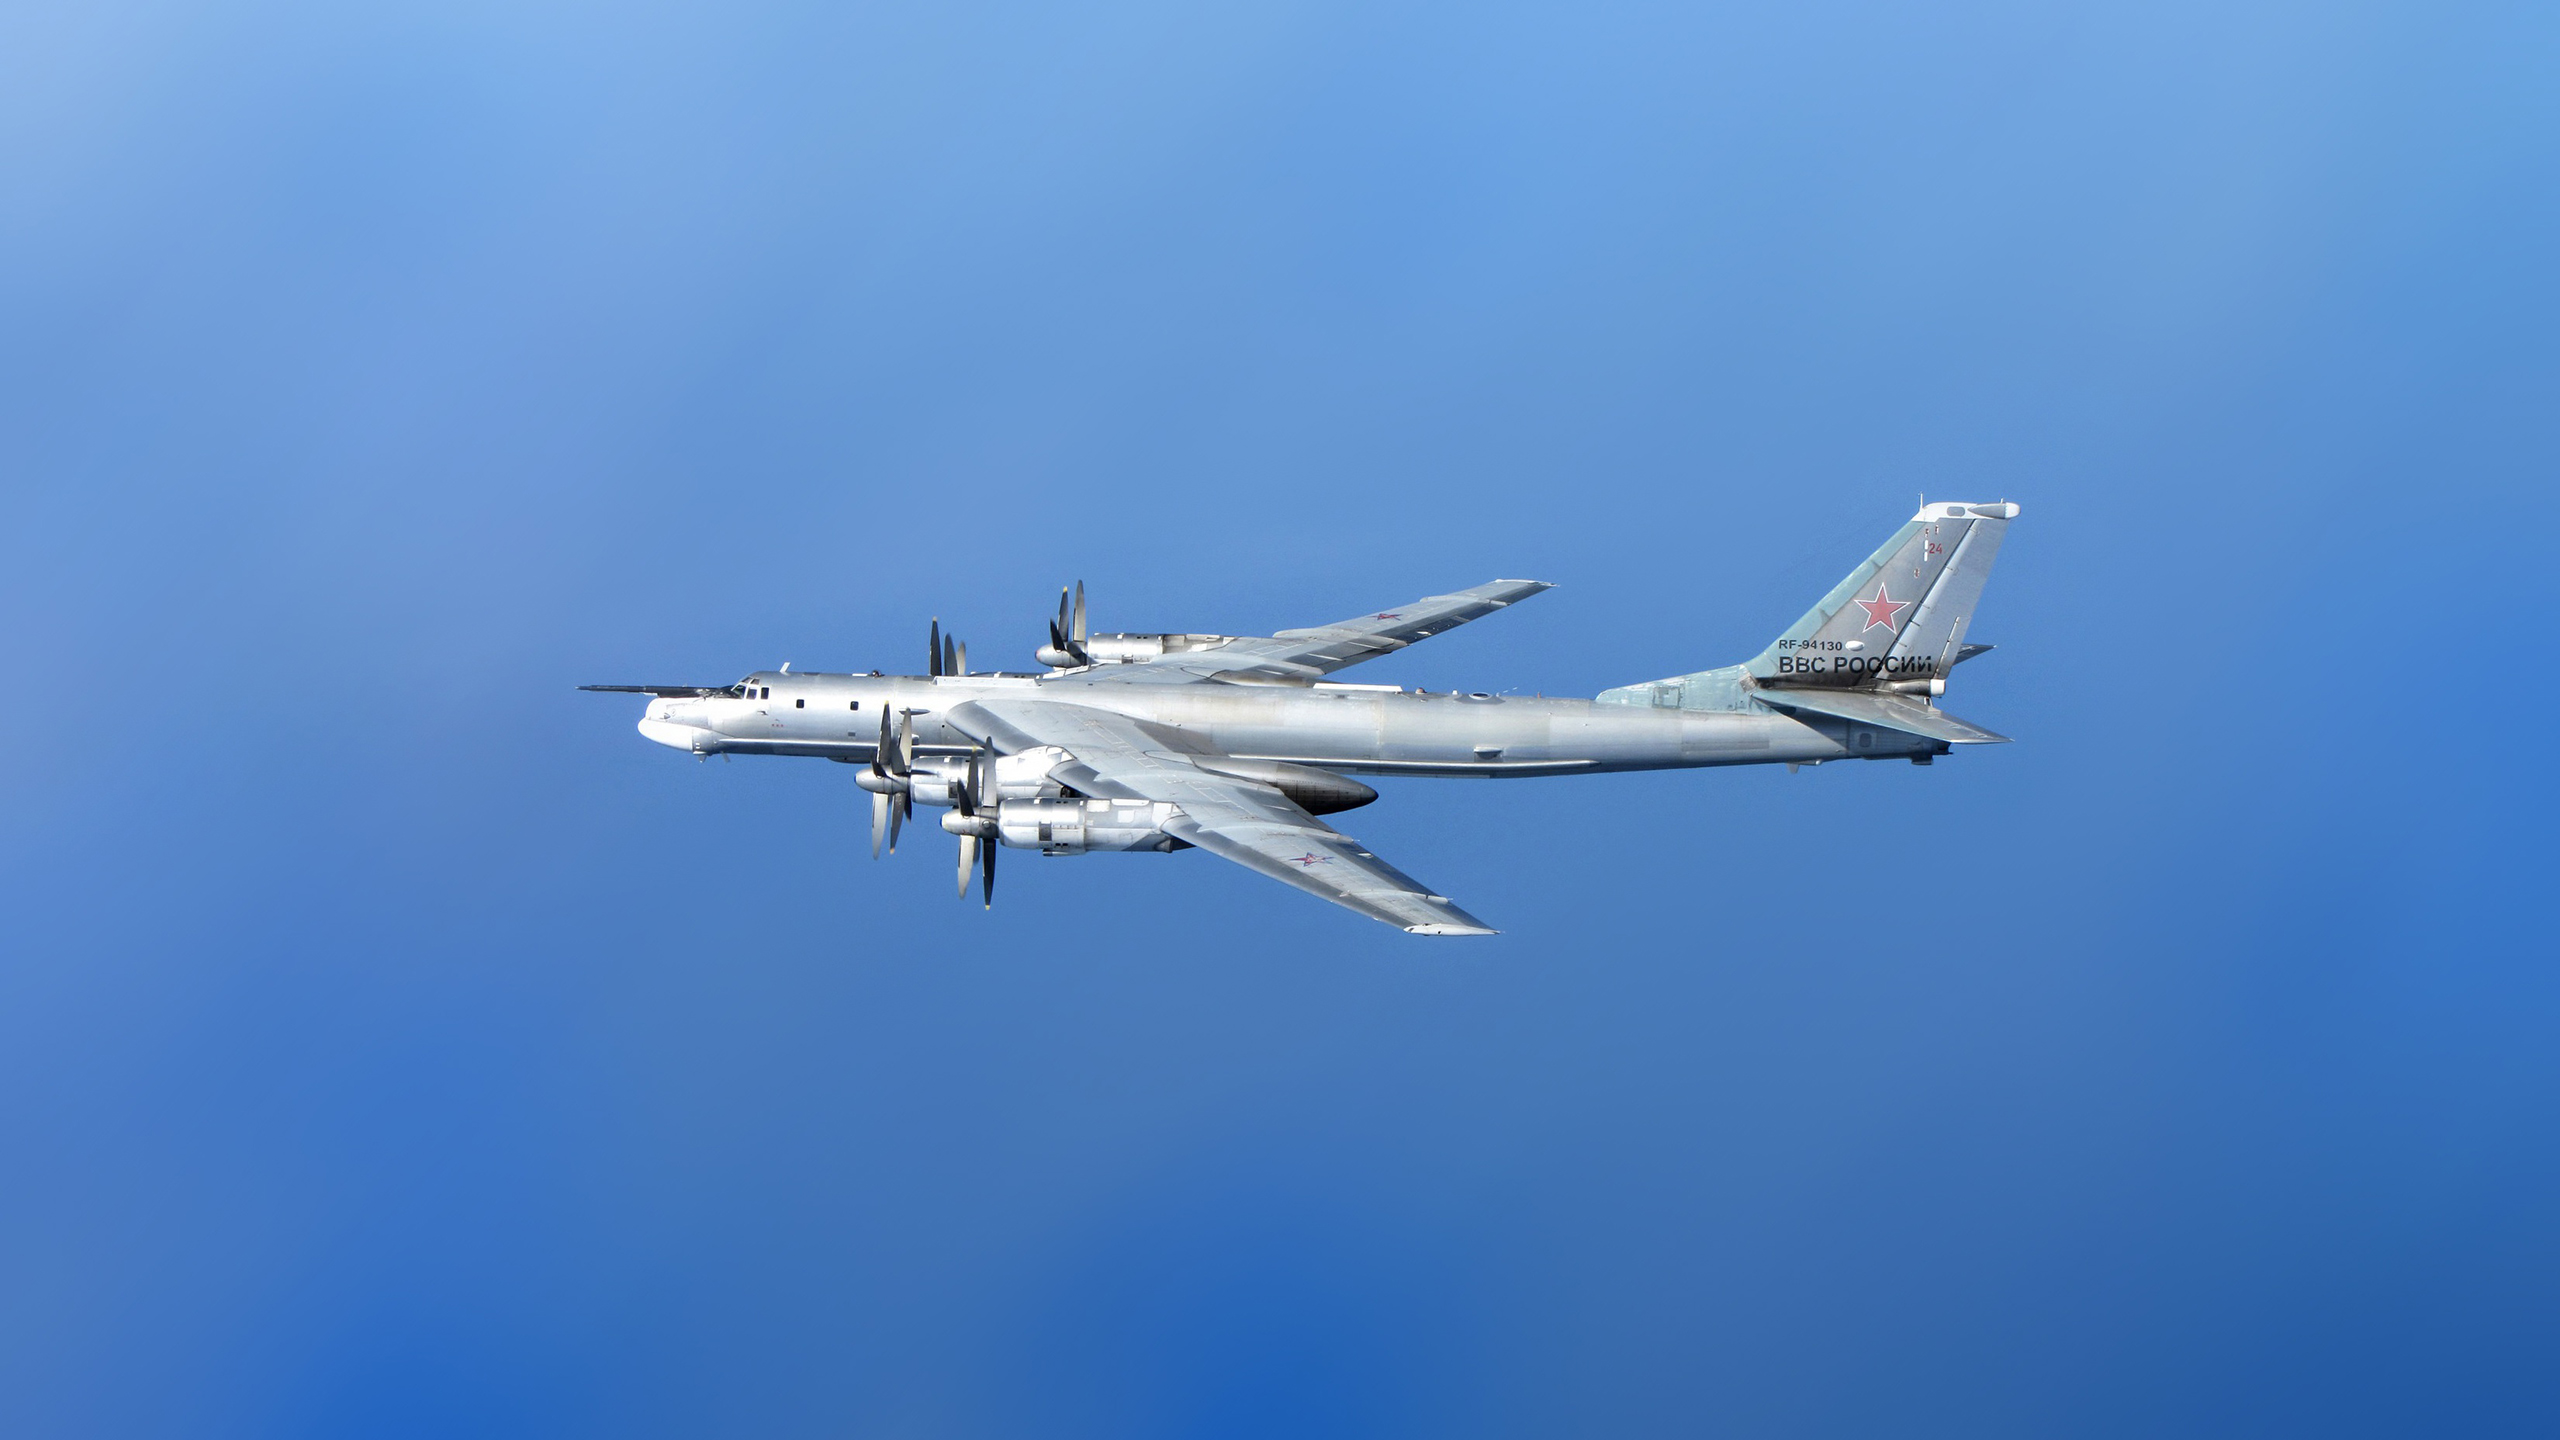 General 2560x1440 Tupolev Tu-95 aircraft military aircraft Bomber strategic bomber sky Russian Air Force Tu-95-MS turboprop